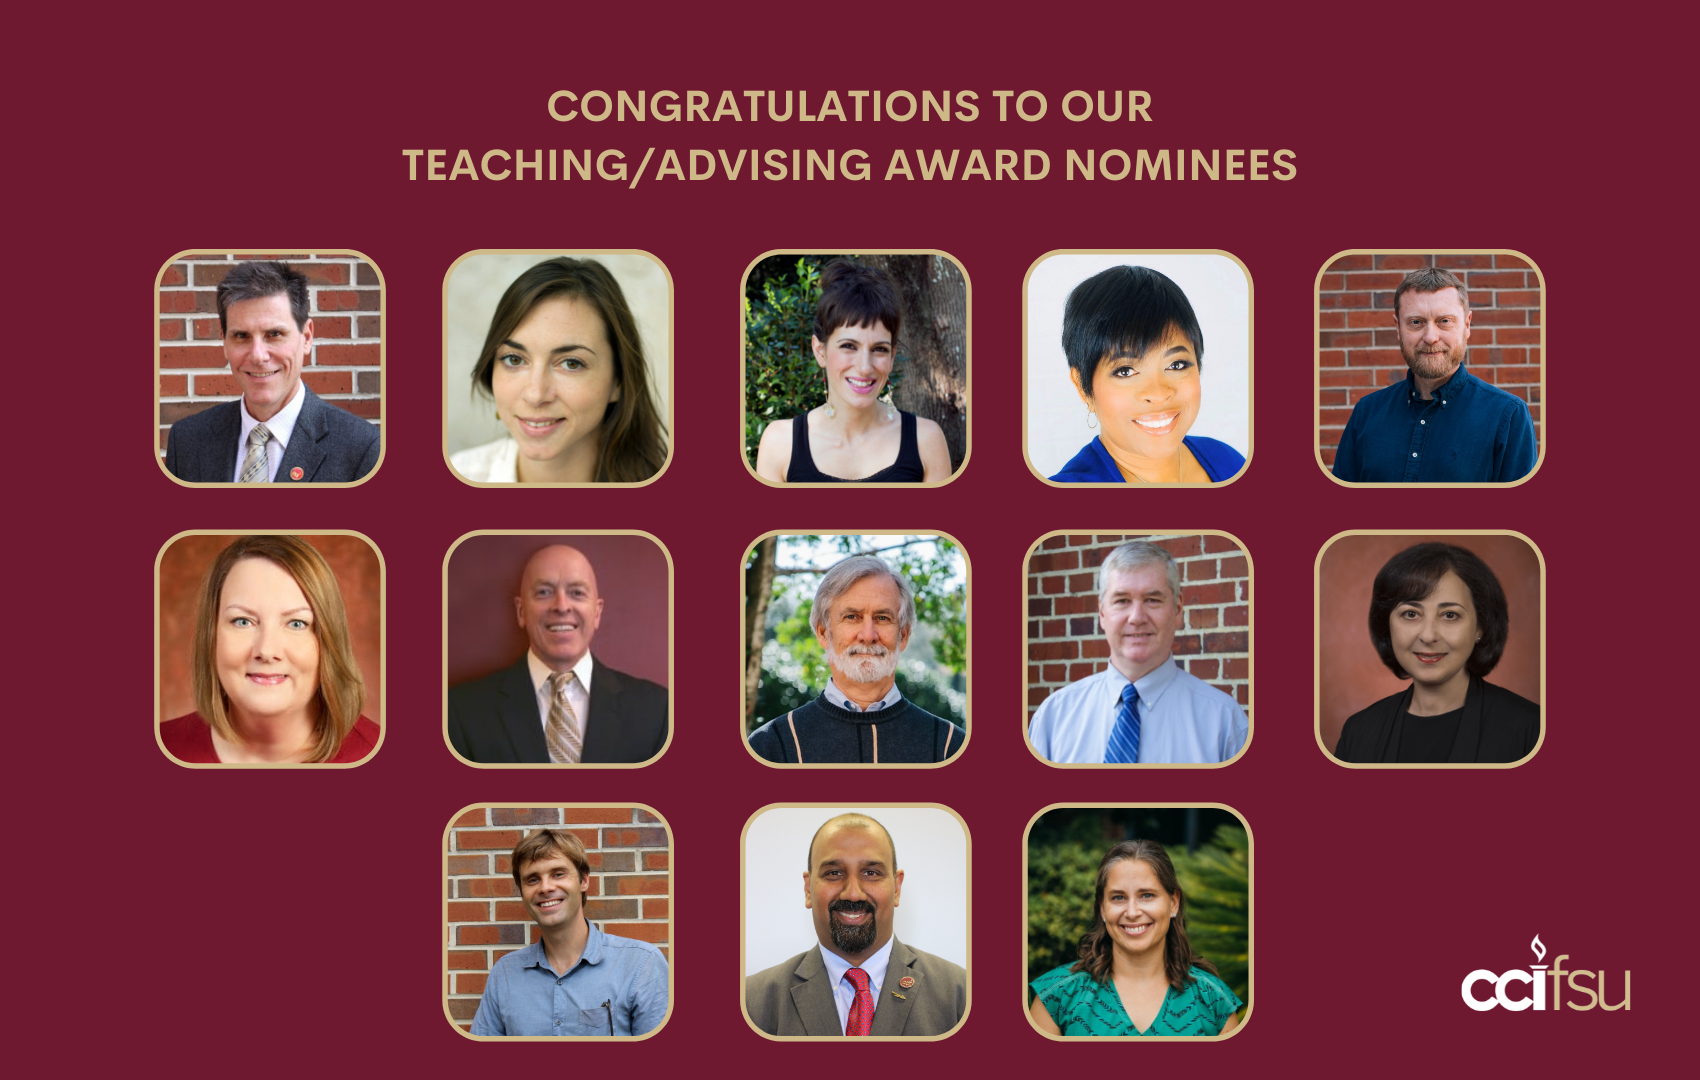 Congratulations to our Teaching/Advising Award Nominees